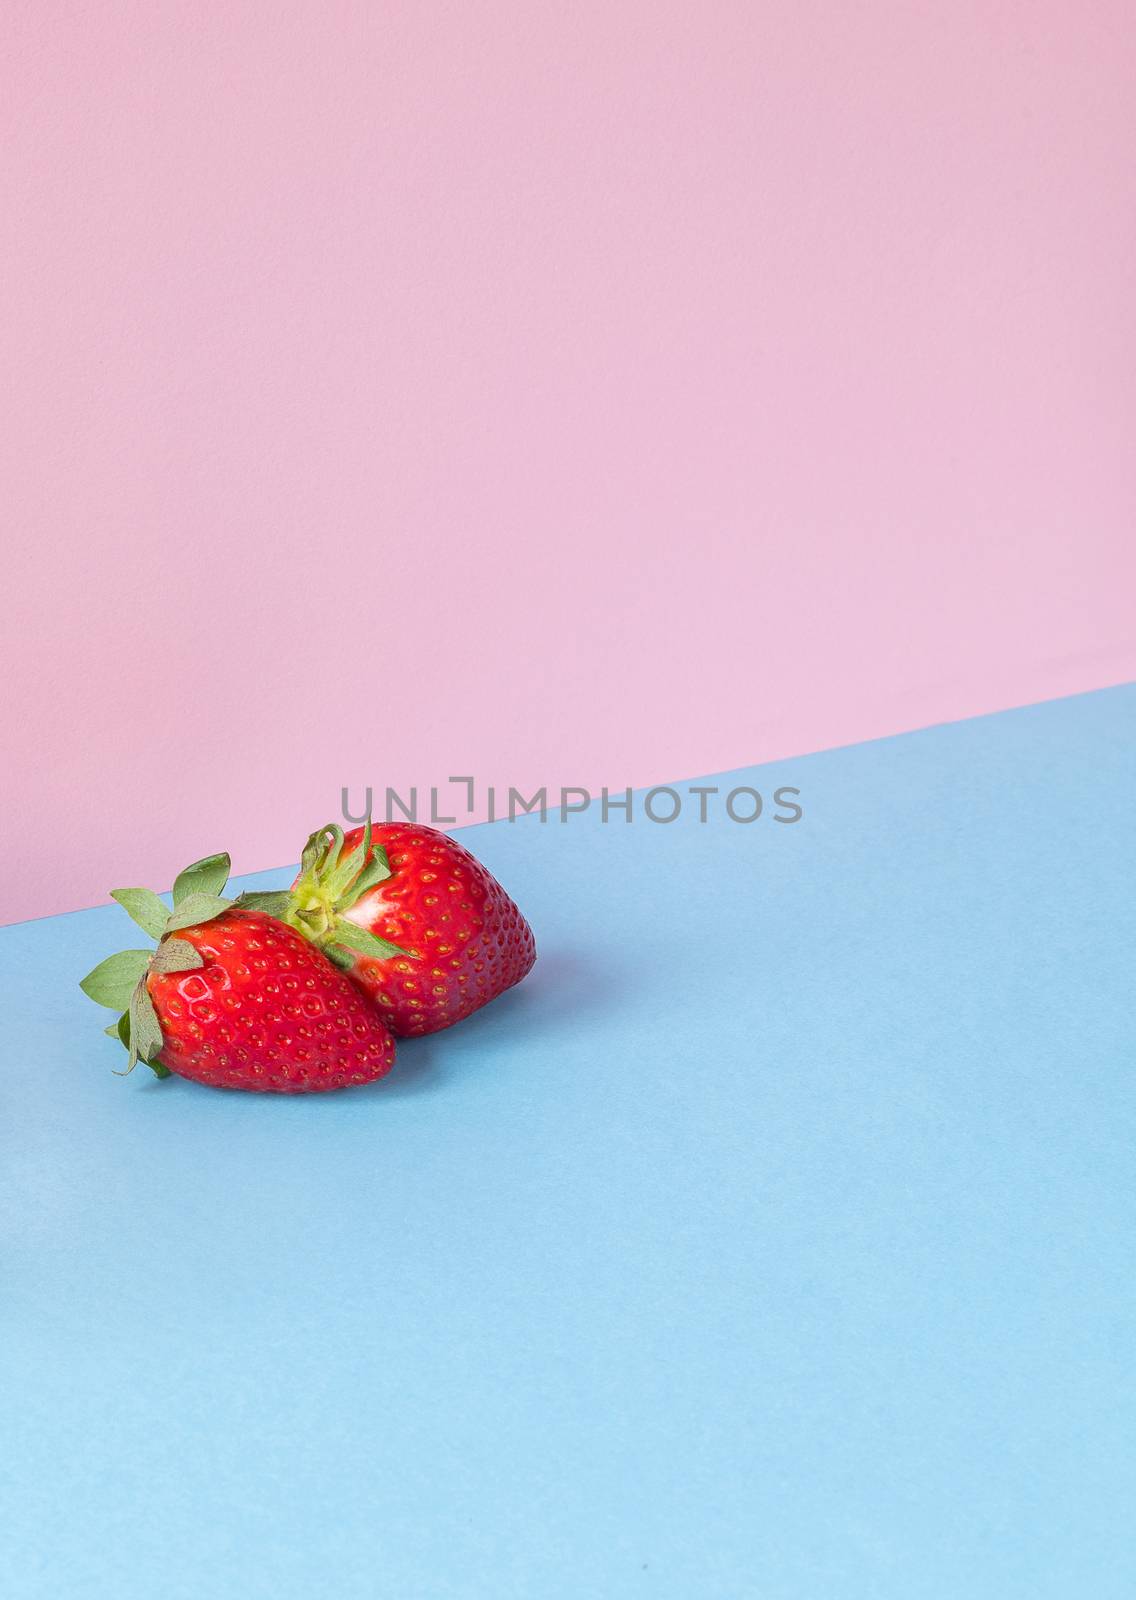 Minimalist image of a couple of strawberries on a light blue and pink background. Copy space available.